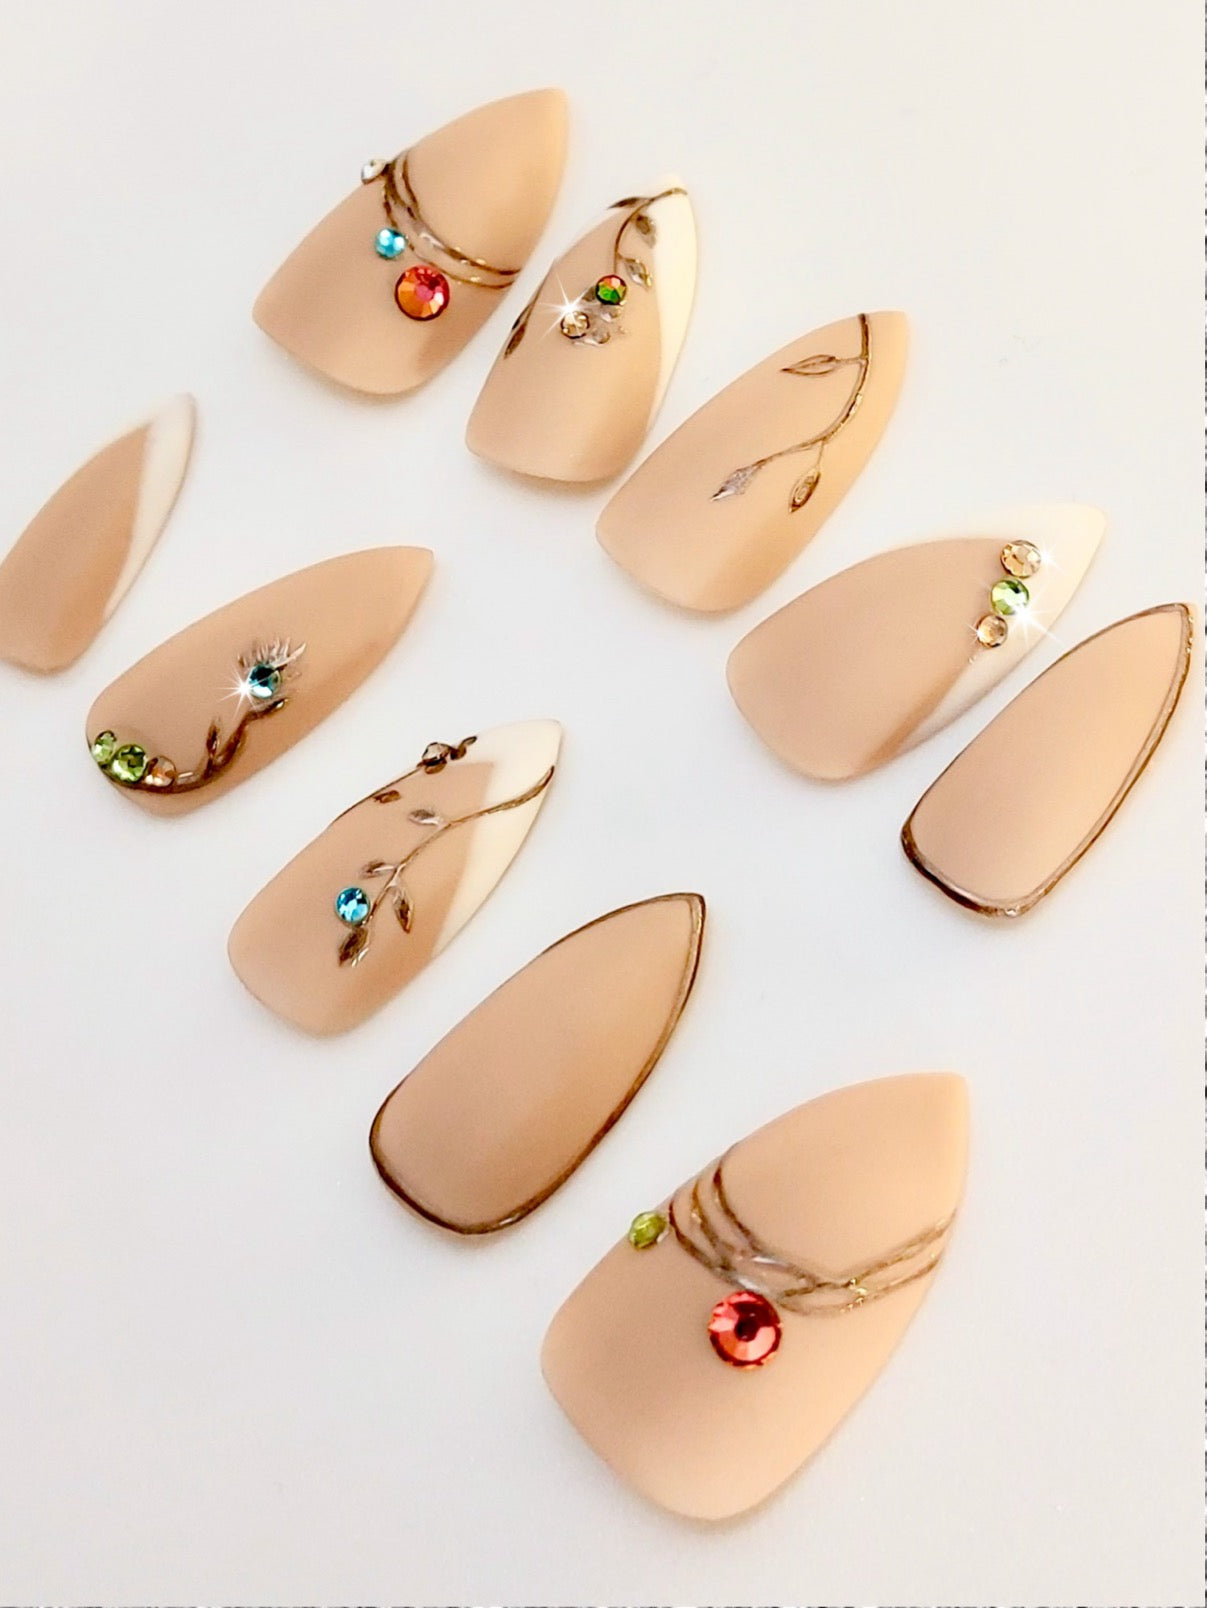 Custom press on nails with nude matte, gold metallic accents, colorful gems like christmas ornaments and french tips on short sharp stiletto shape. FancyB Nails.